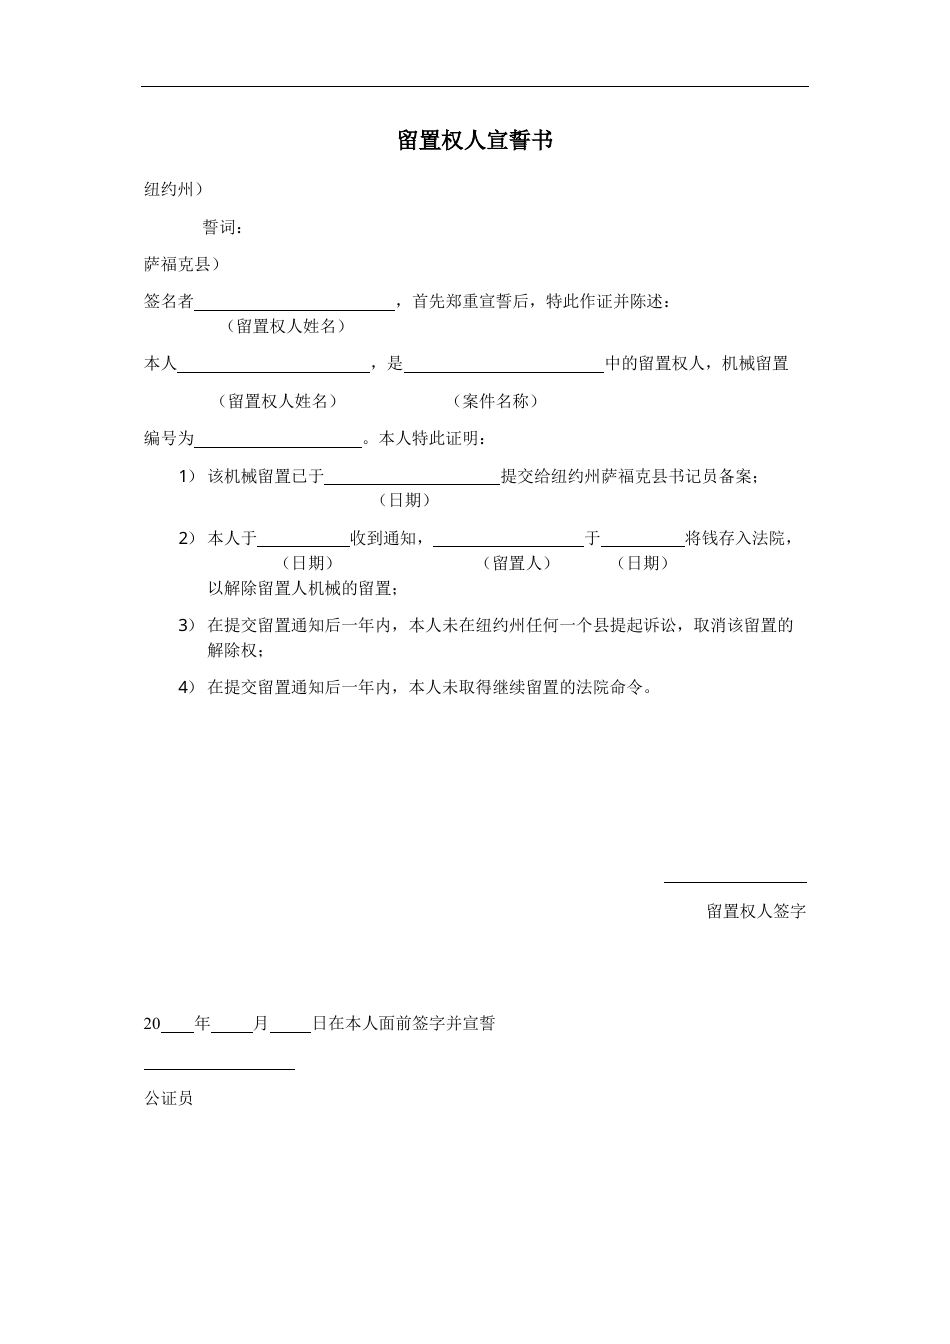 Affidavit of the Lienor - Suffolk County, New York (Chinese), Page 1